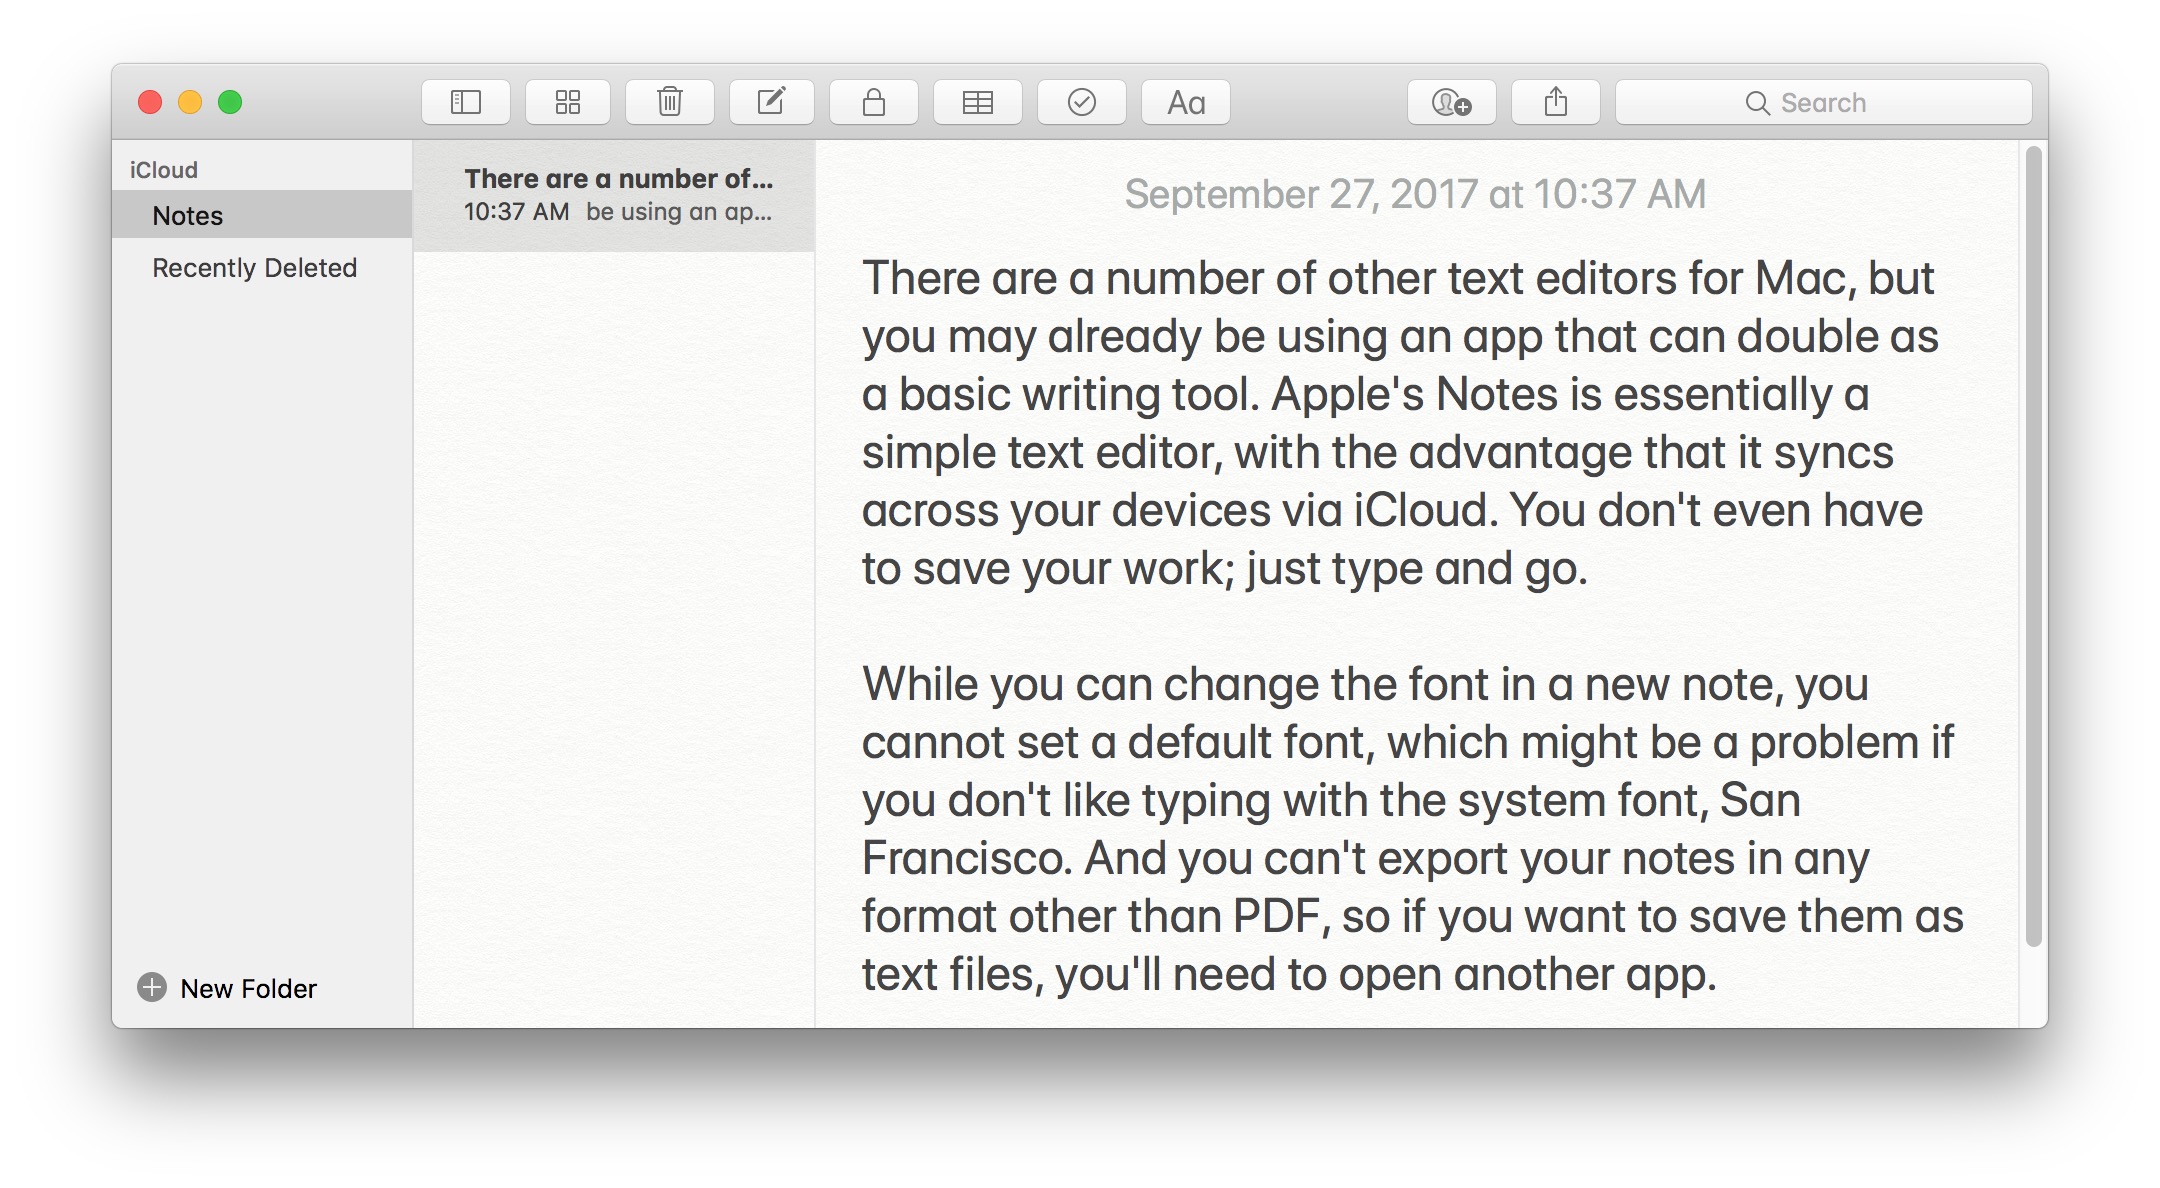 best text editor program for typing code on a mac?